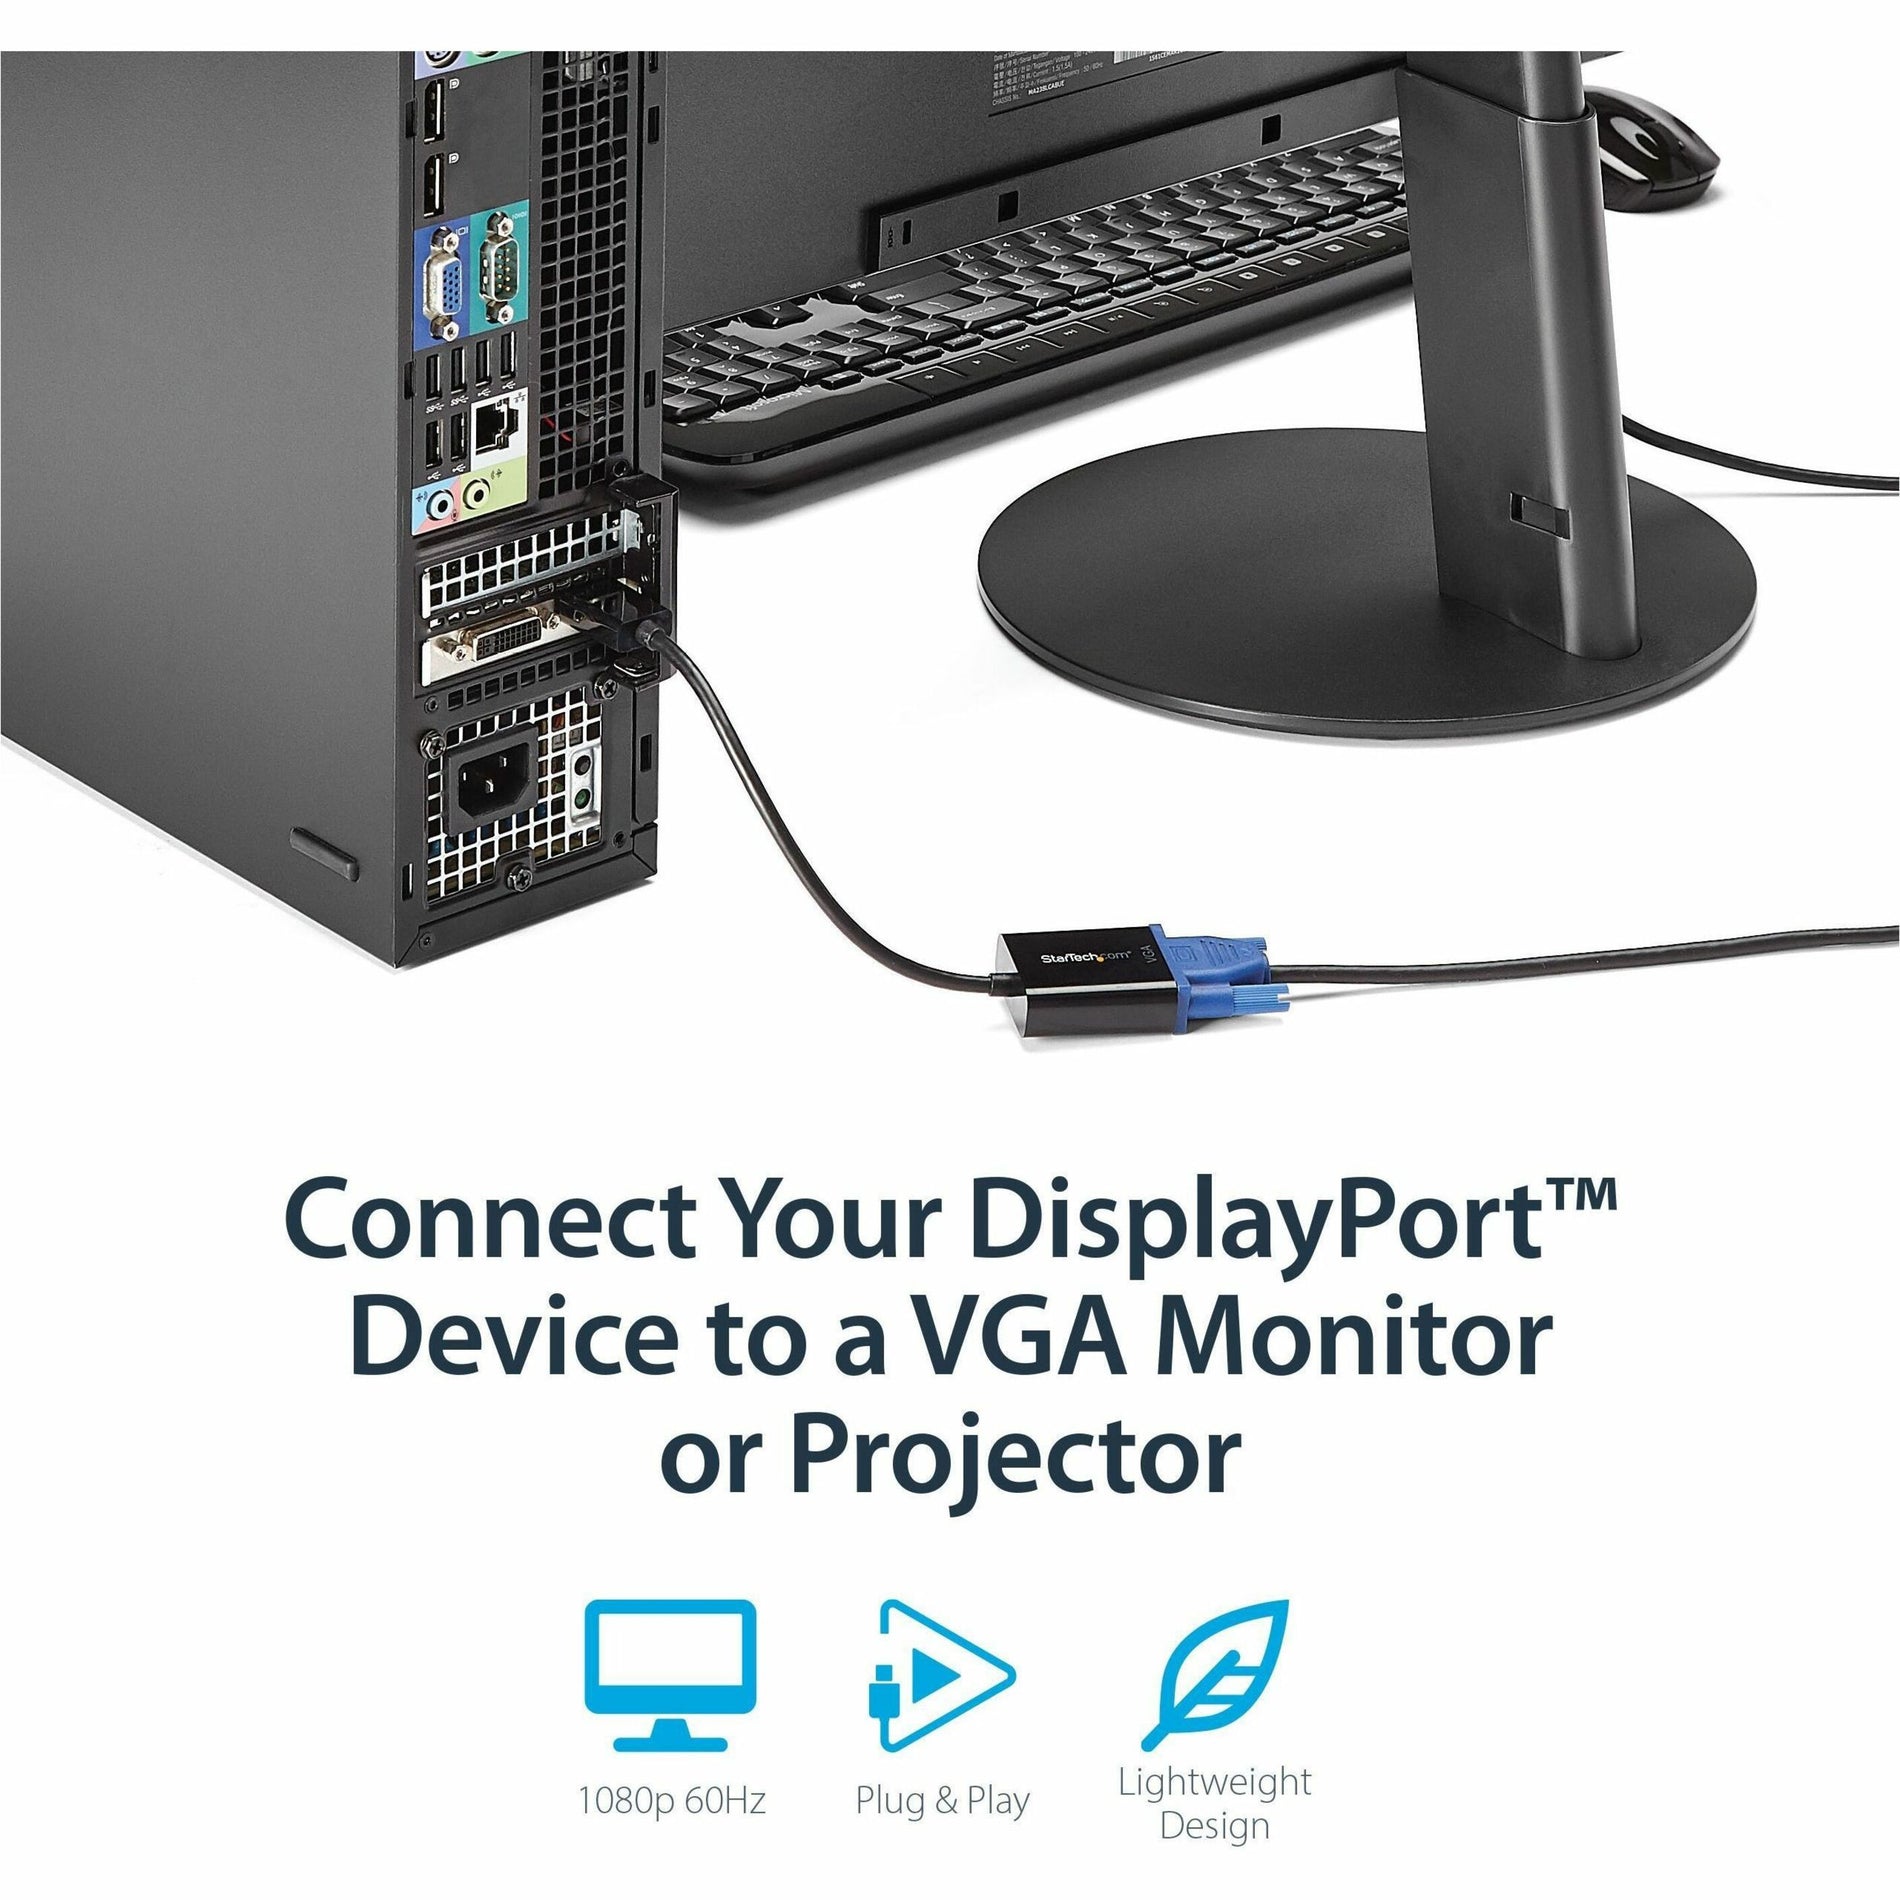 StarTech.com DP2VGA3 DisplayPort 1.2 to VGA Adapter Converter - Active, Plug and Play, 2048 x 1152 Resolution Supported